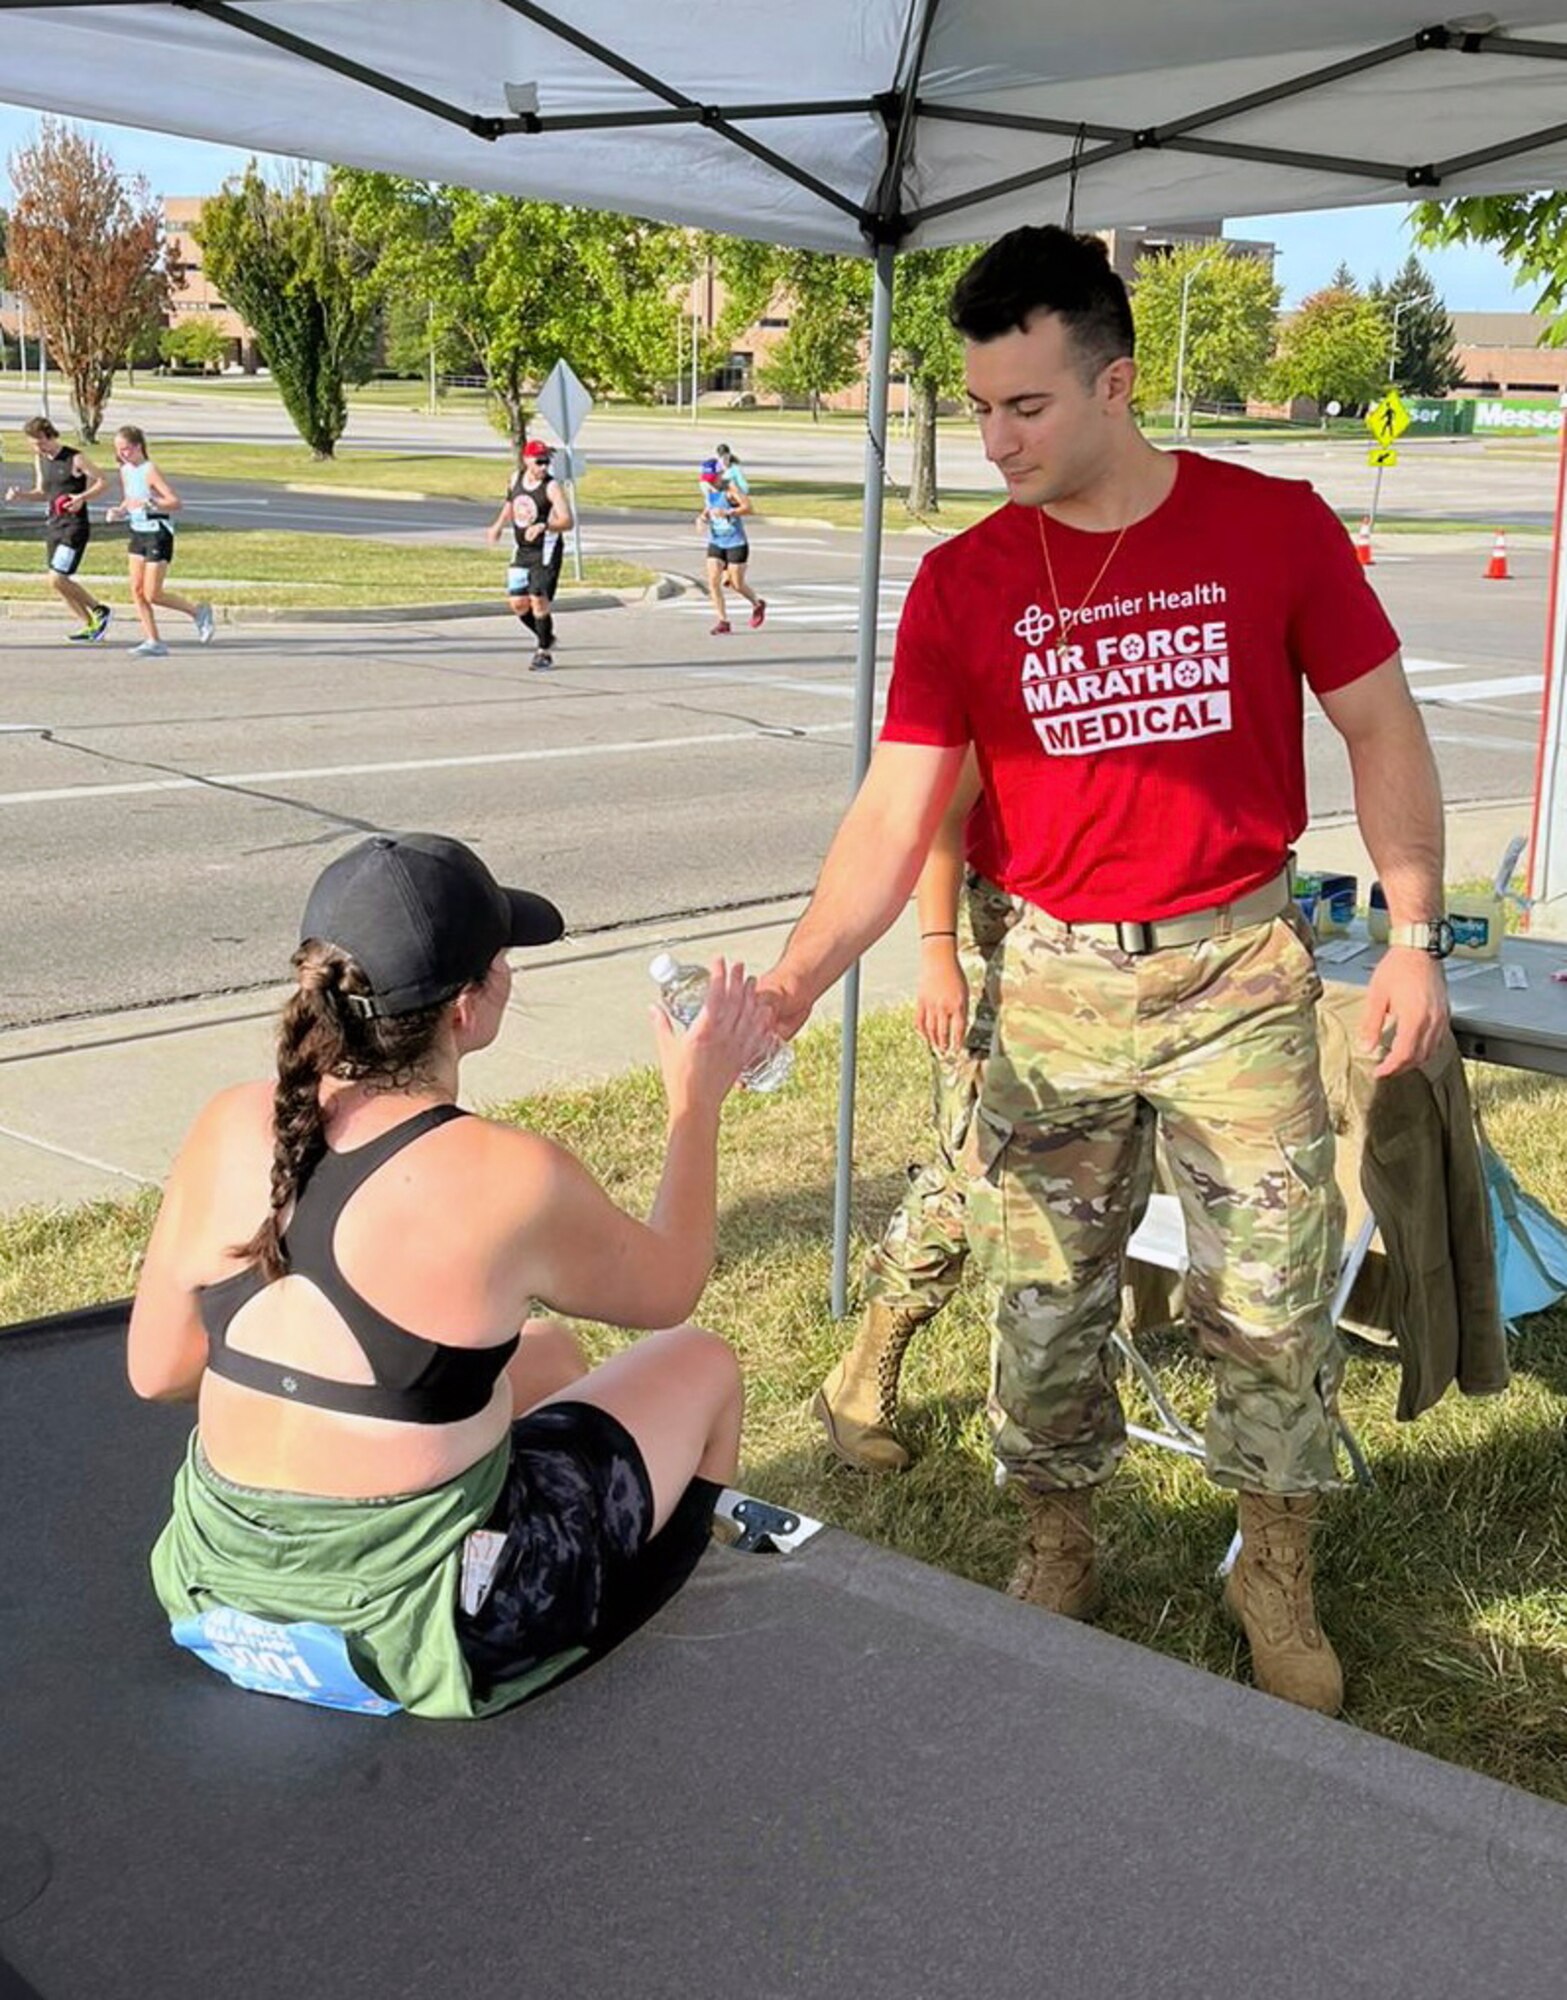 U.S. Air Force Staff Sgt. Philip Aliberti, right, 445th Aeromedical Staging Squadron, offers hydration to a marathon runner experiencing cramps in Medical Tent N between mile maker 20 and 21 during the Air Force Marathon at Wright-Patterson Air Force Base Ohio, Sept. 16, 2023. More than 8,000 runners competed in the marathon which included a half marathon, 10K run, 5K run and more in addition to the full marathon. (Courtesy photo)